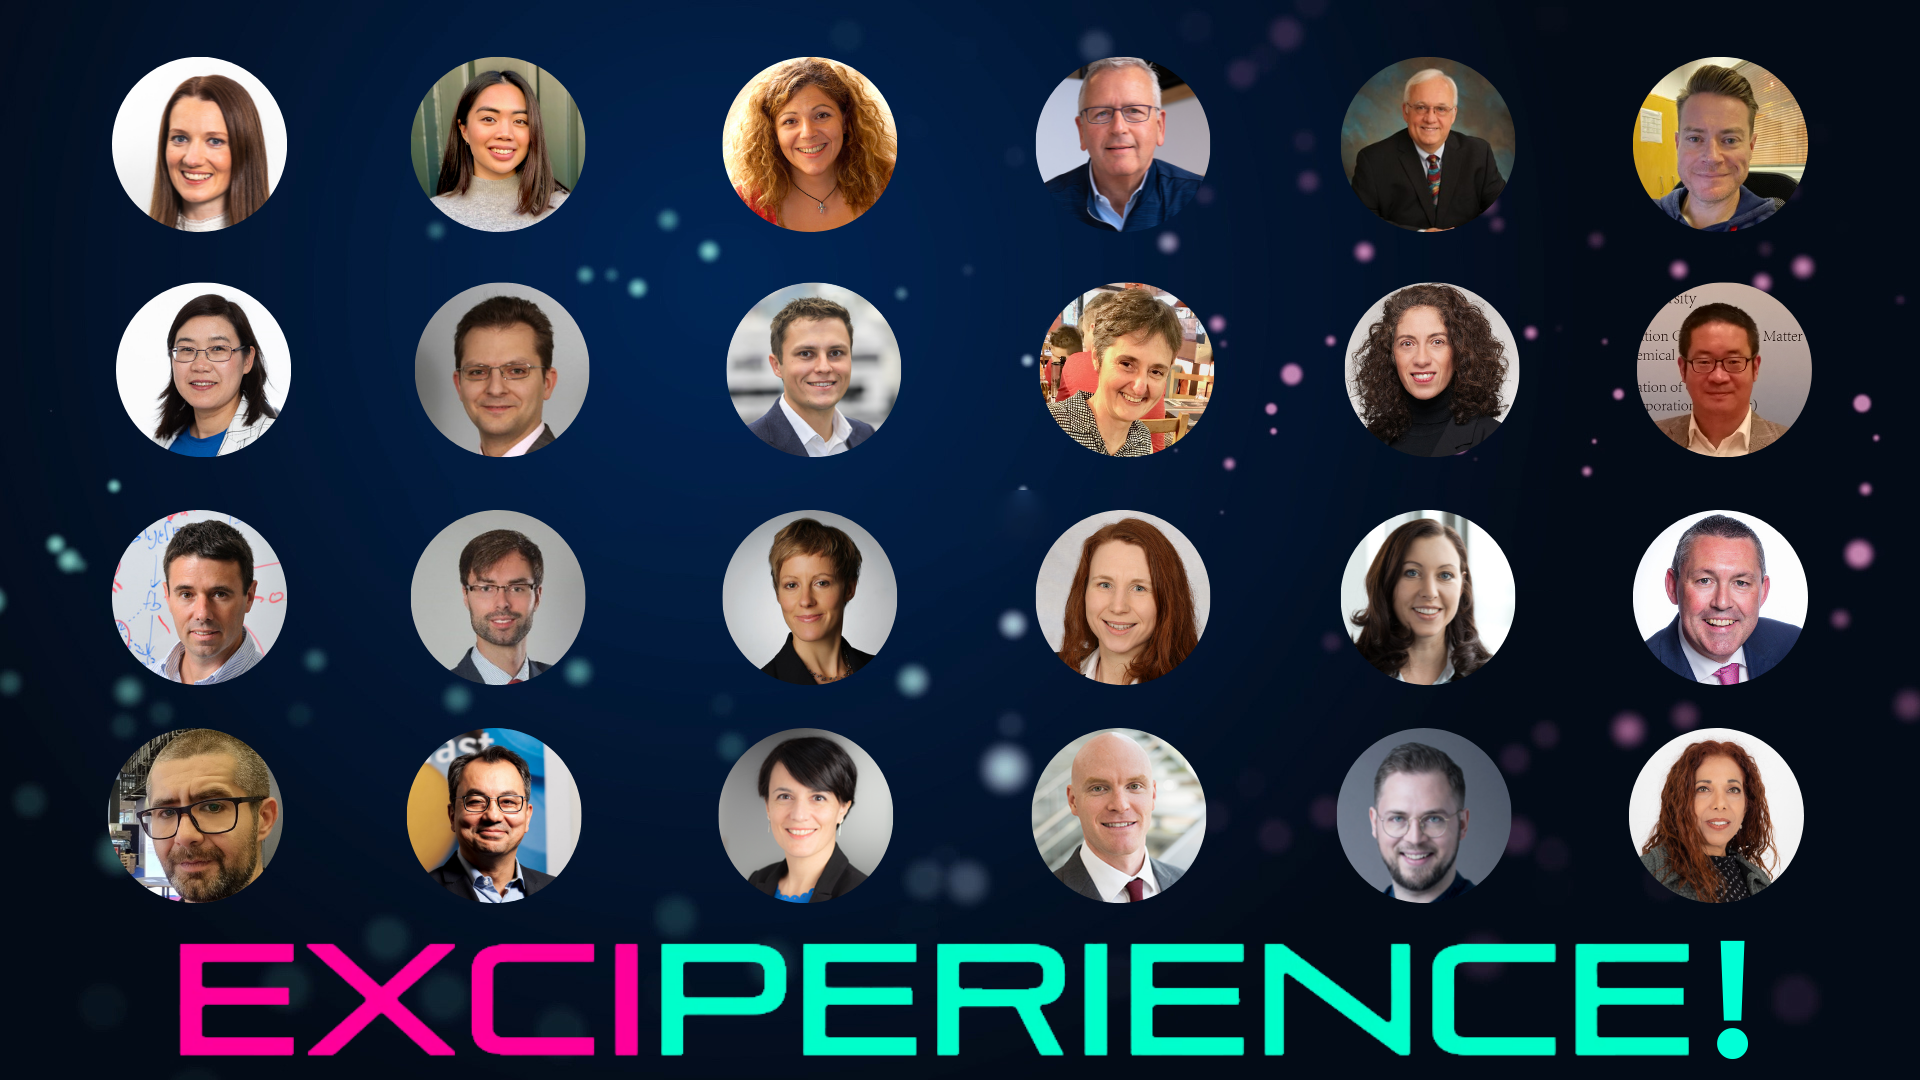 All ExciPerience Speakers 2022